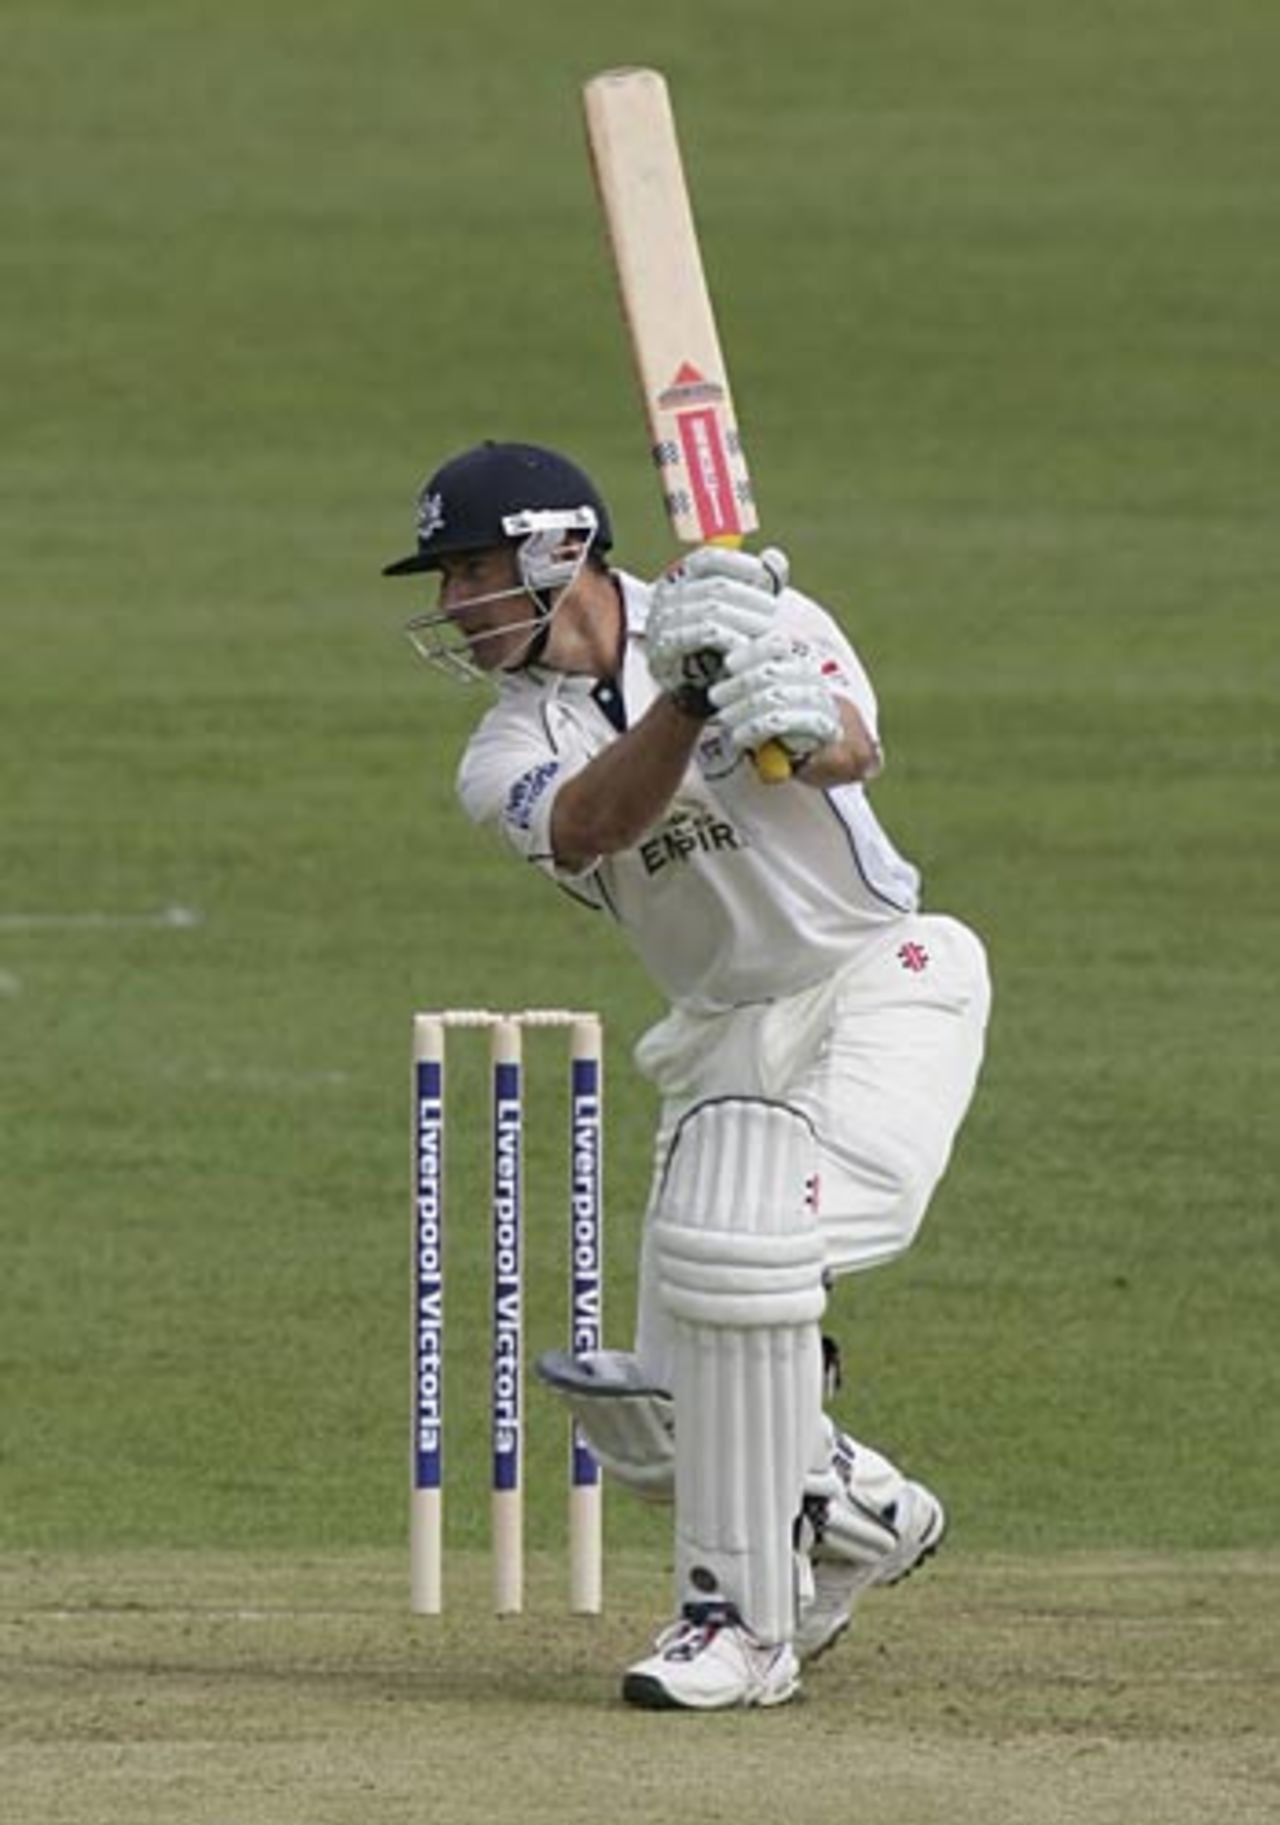 Craig Spearman launches into a cover drive as he begins his season in style, Gloucestershire v Somerset, County Championship, Bristol, April 18, 2006